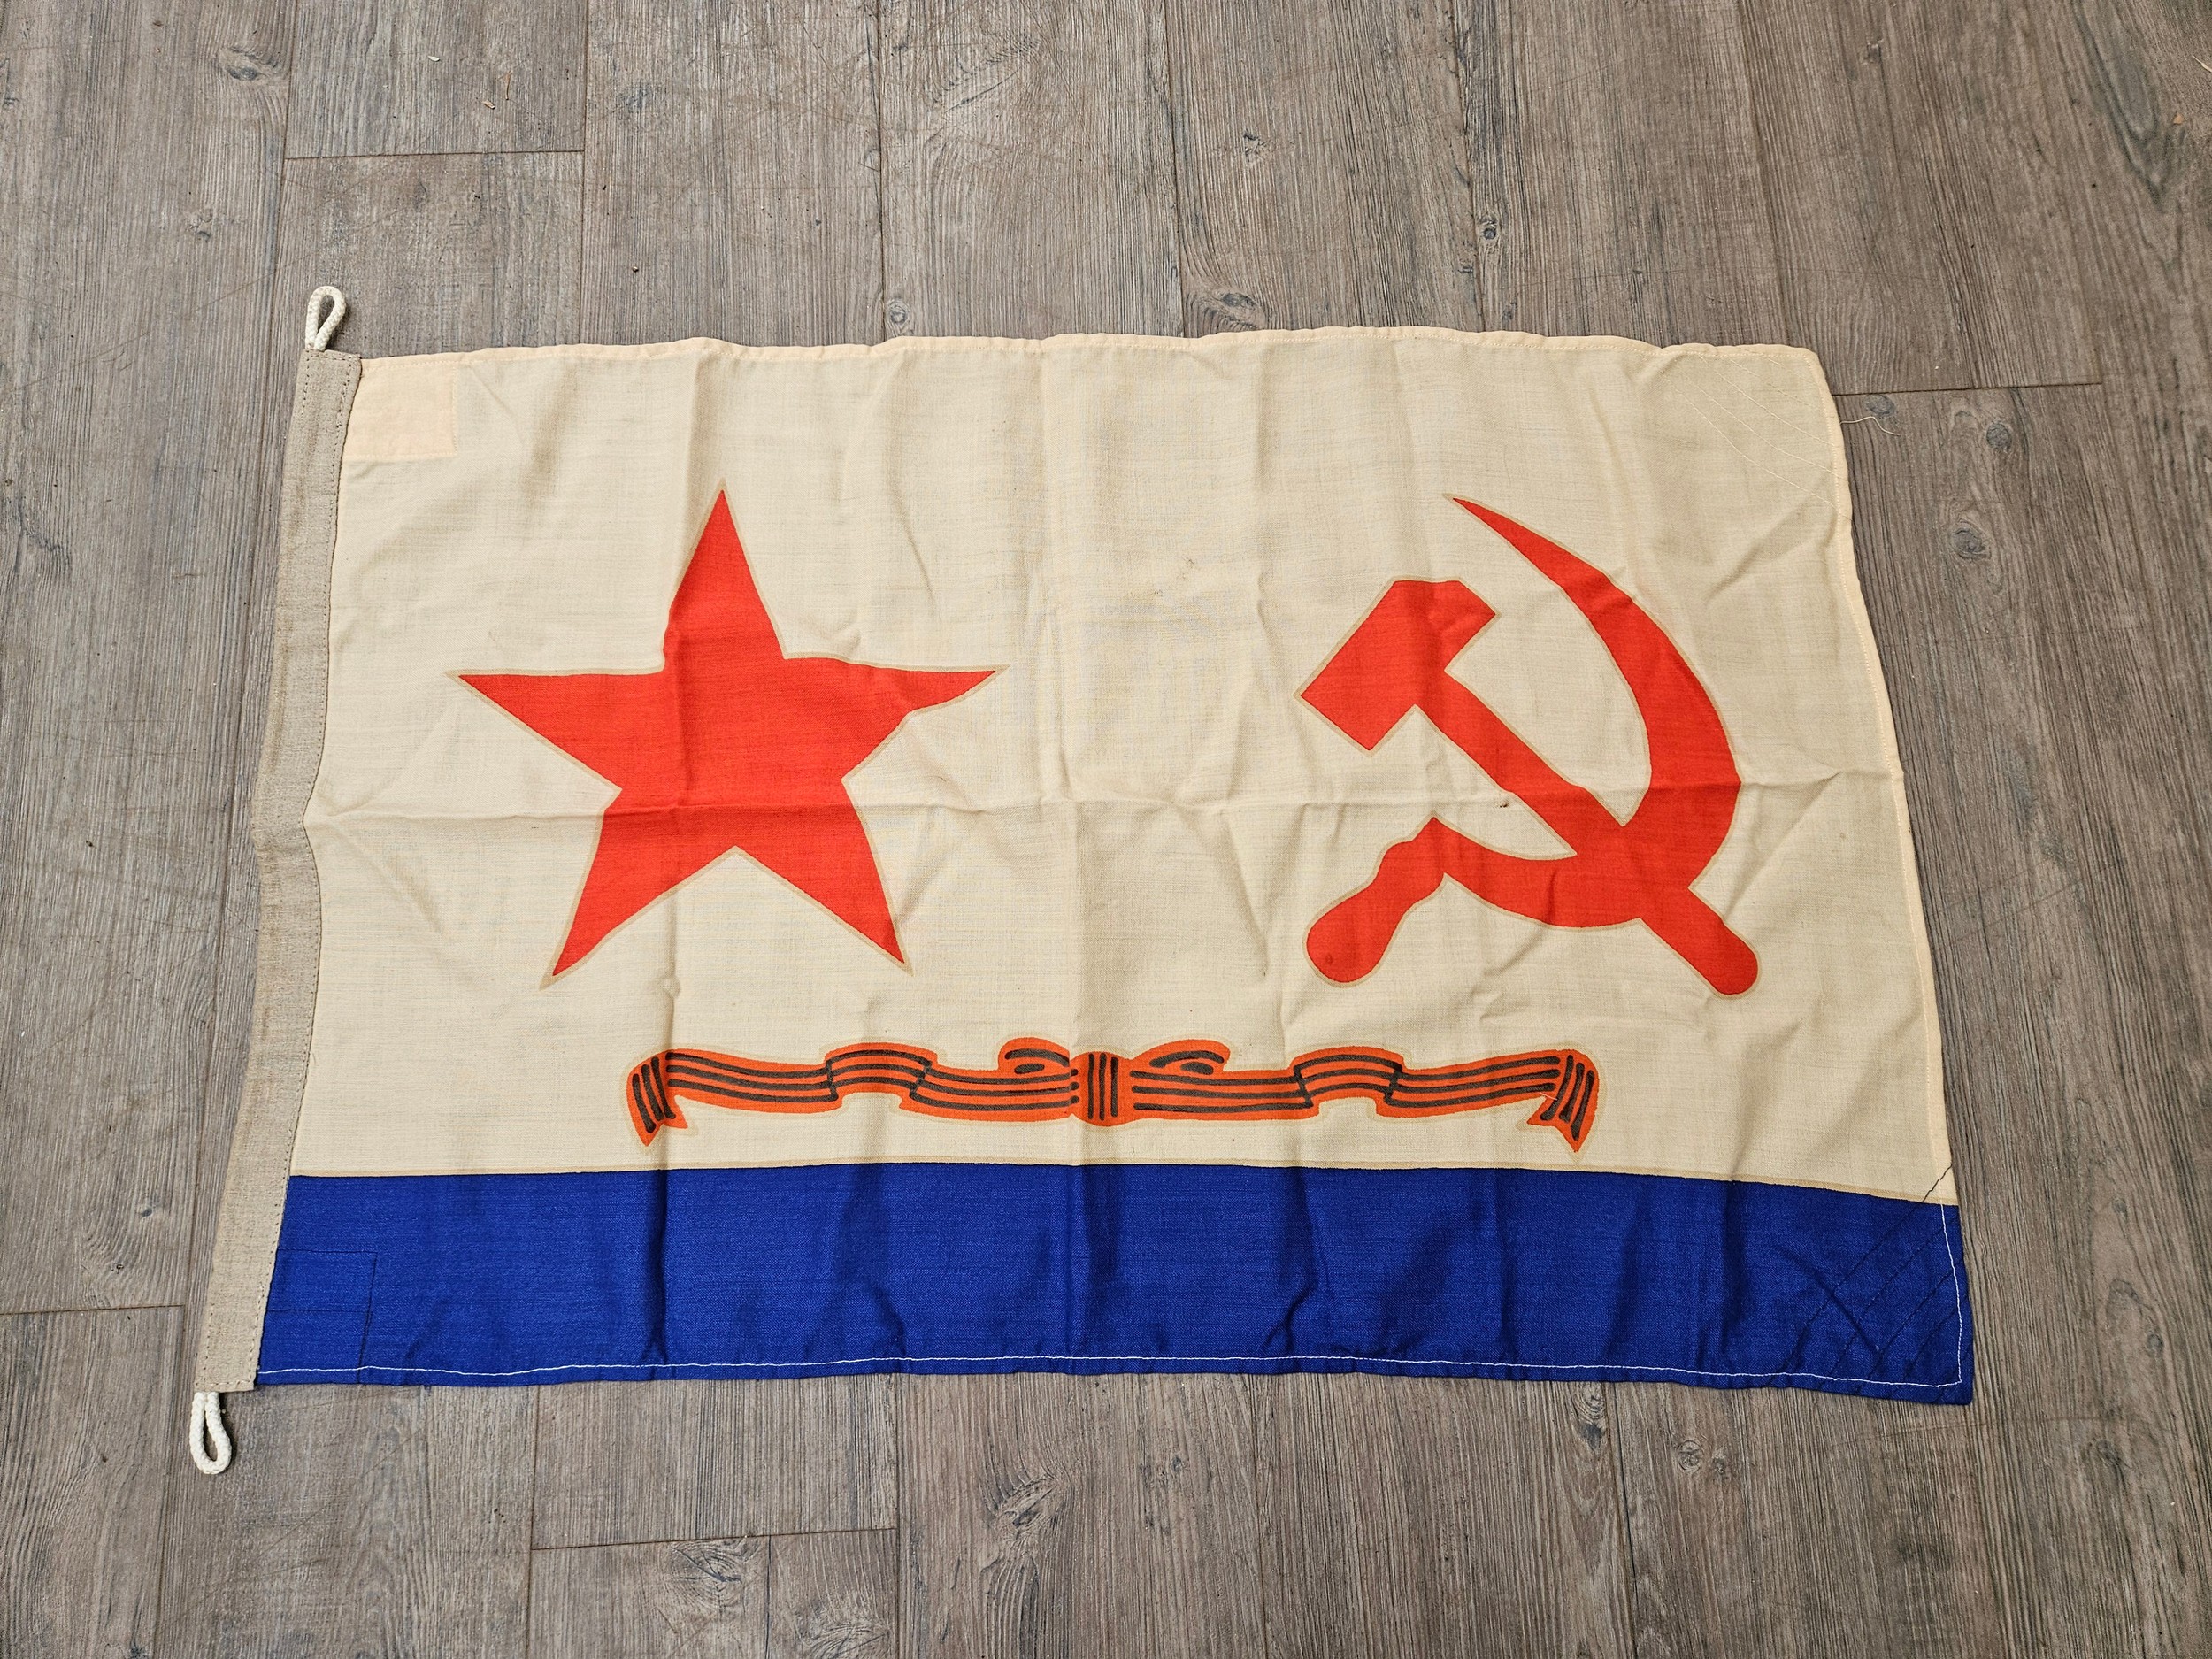 Three USSR Soviet Russian flags: Border Guard 1987, Naval ensign 1989 and Hydrographic vessel flag - Image 3 of 4